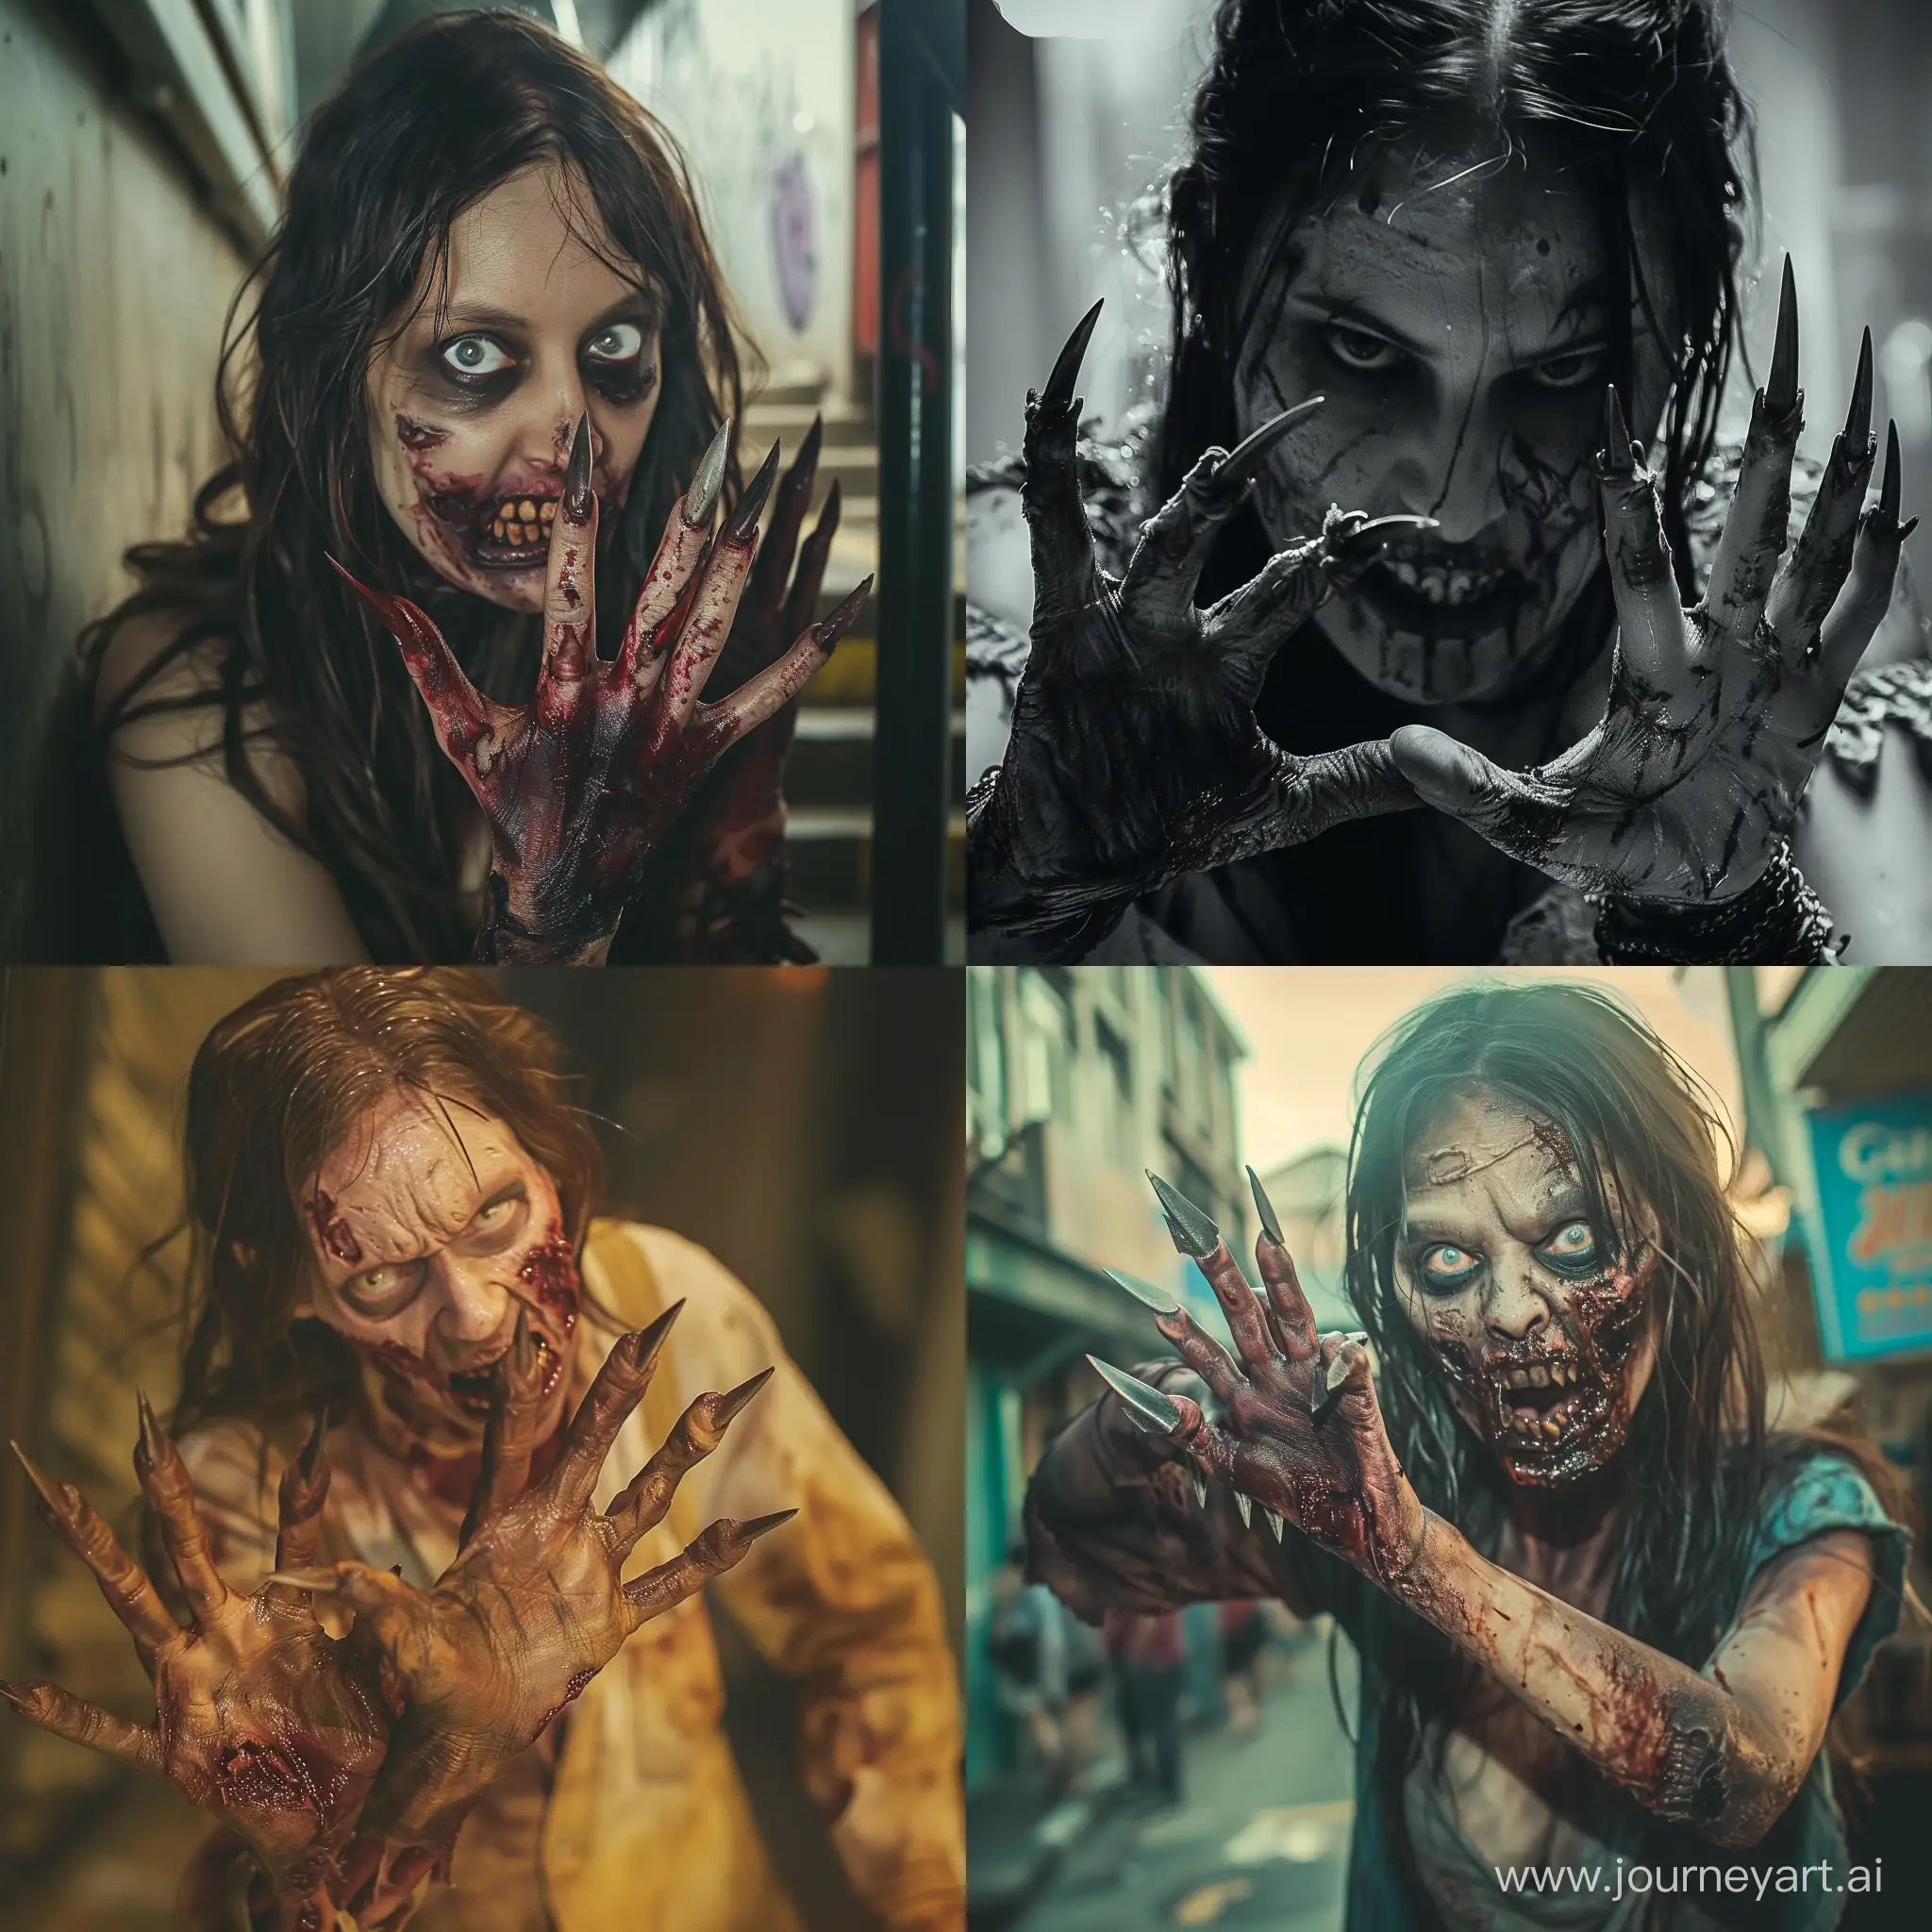 Sinister-Zombie-Woman-with-Clawed-Hands-Beckoning-in-a-Dark-Alley